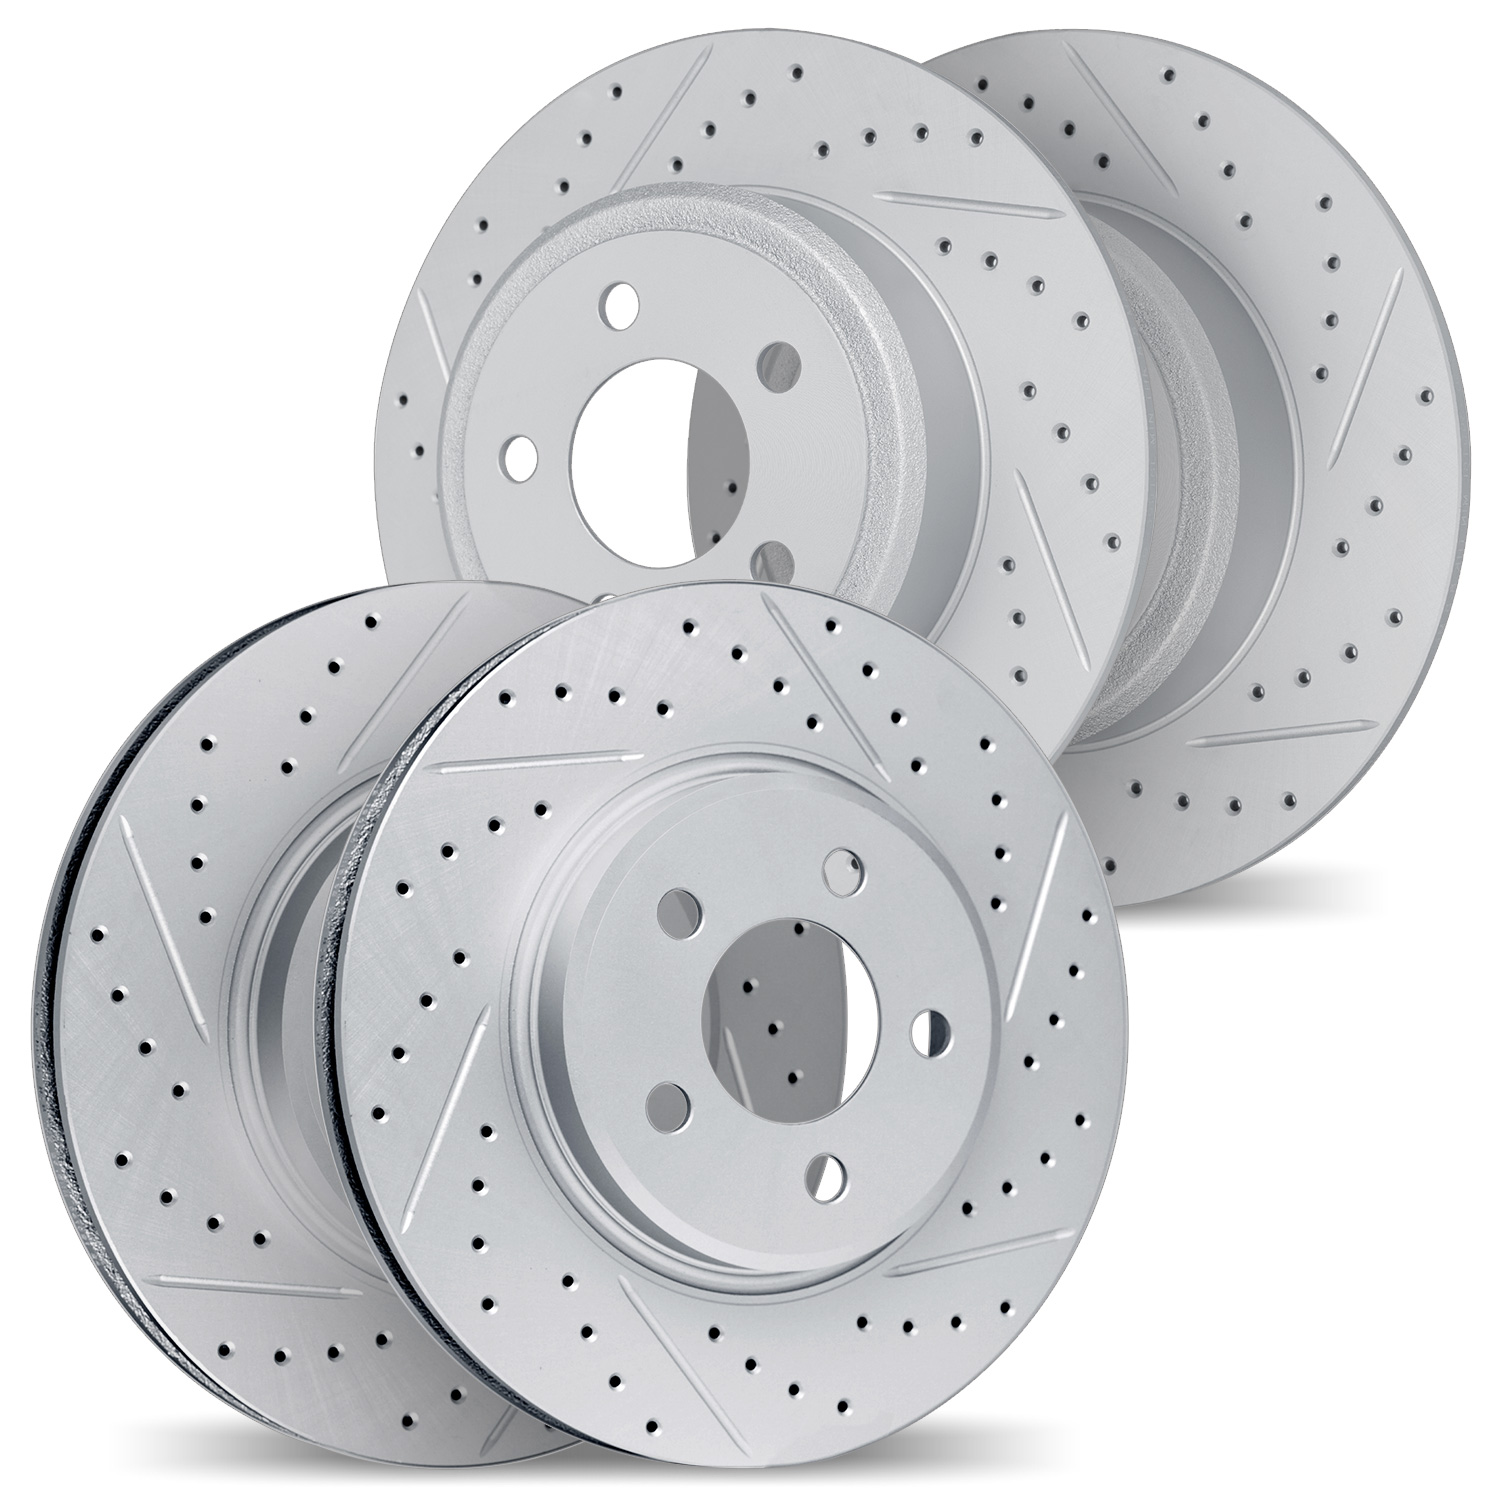 2004-76037 Geoperformance Drilled/Slotted Brake Rotors, 2002-2006 Lexus/Toyota/Scion, Position: Front and Rear